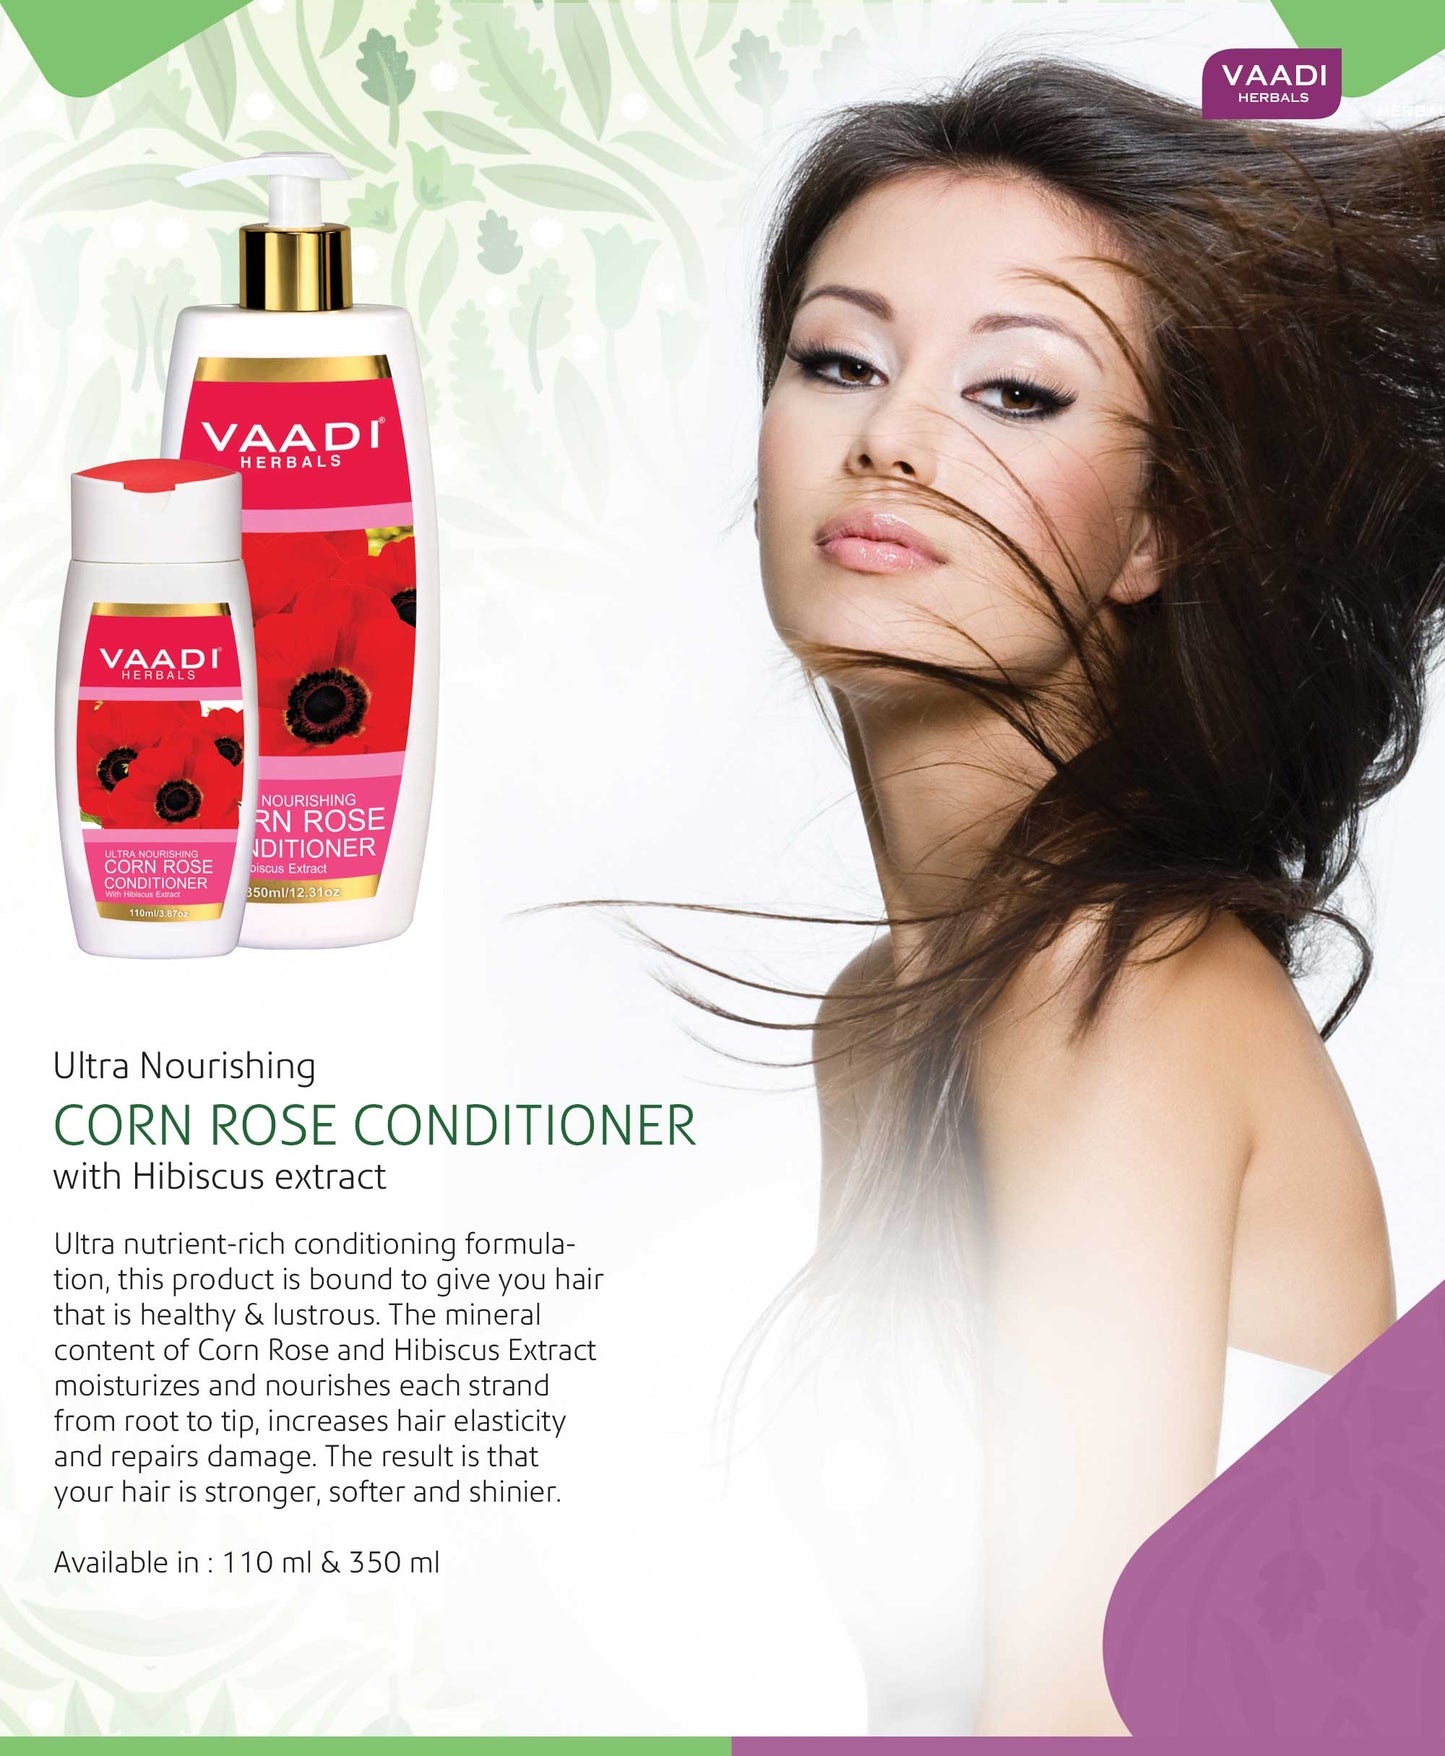 Ultra Nutrient Organic Rich Corn Rose Conditioner with Hibiscus Extract- Conditions & Softens Hair ( 3 x 110ml / 4 fl oz)